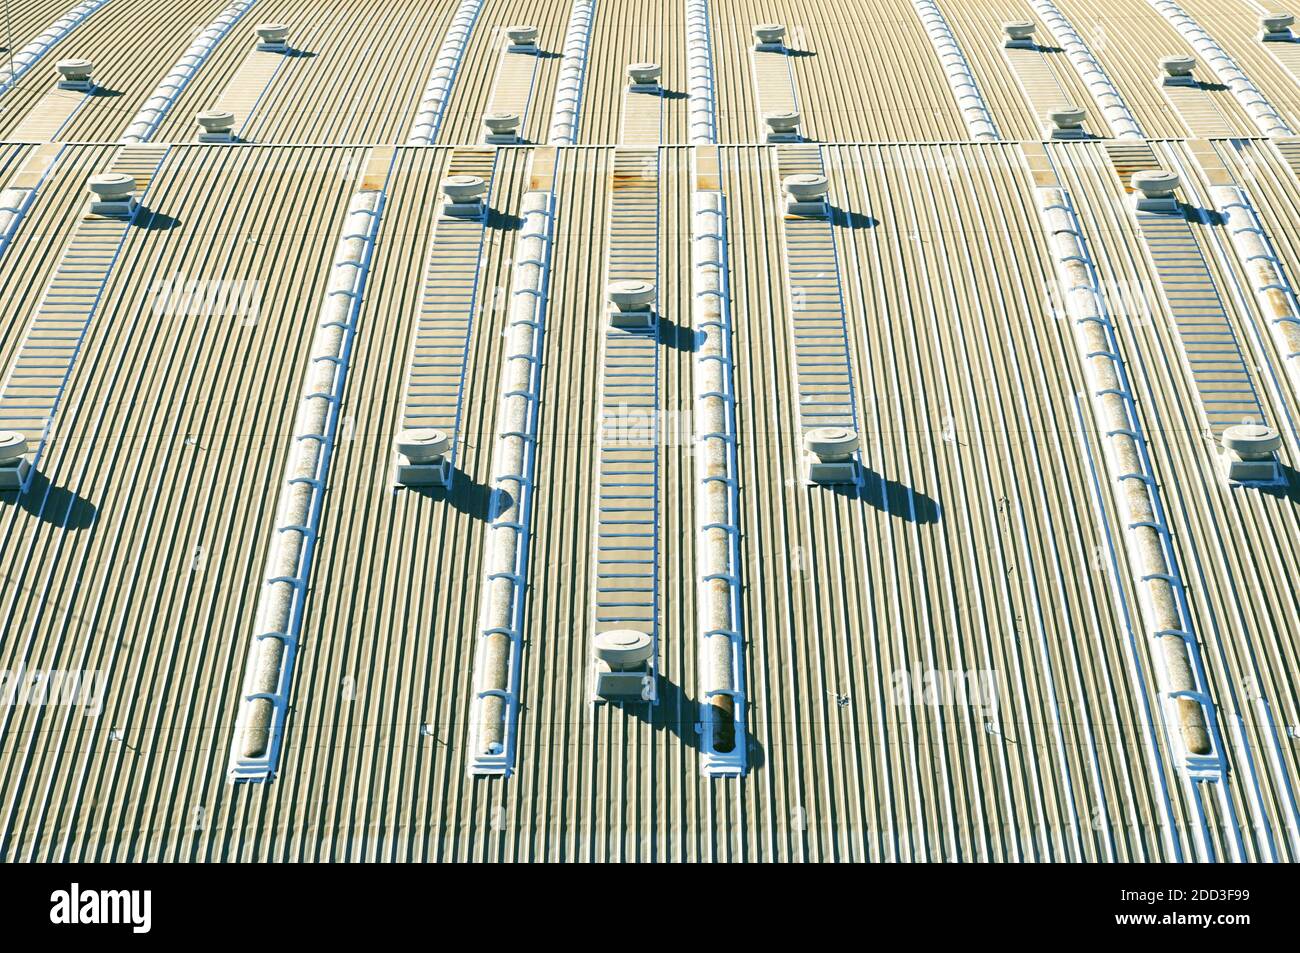 Large industrial buildings roofs and truck Stock Photo